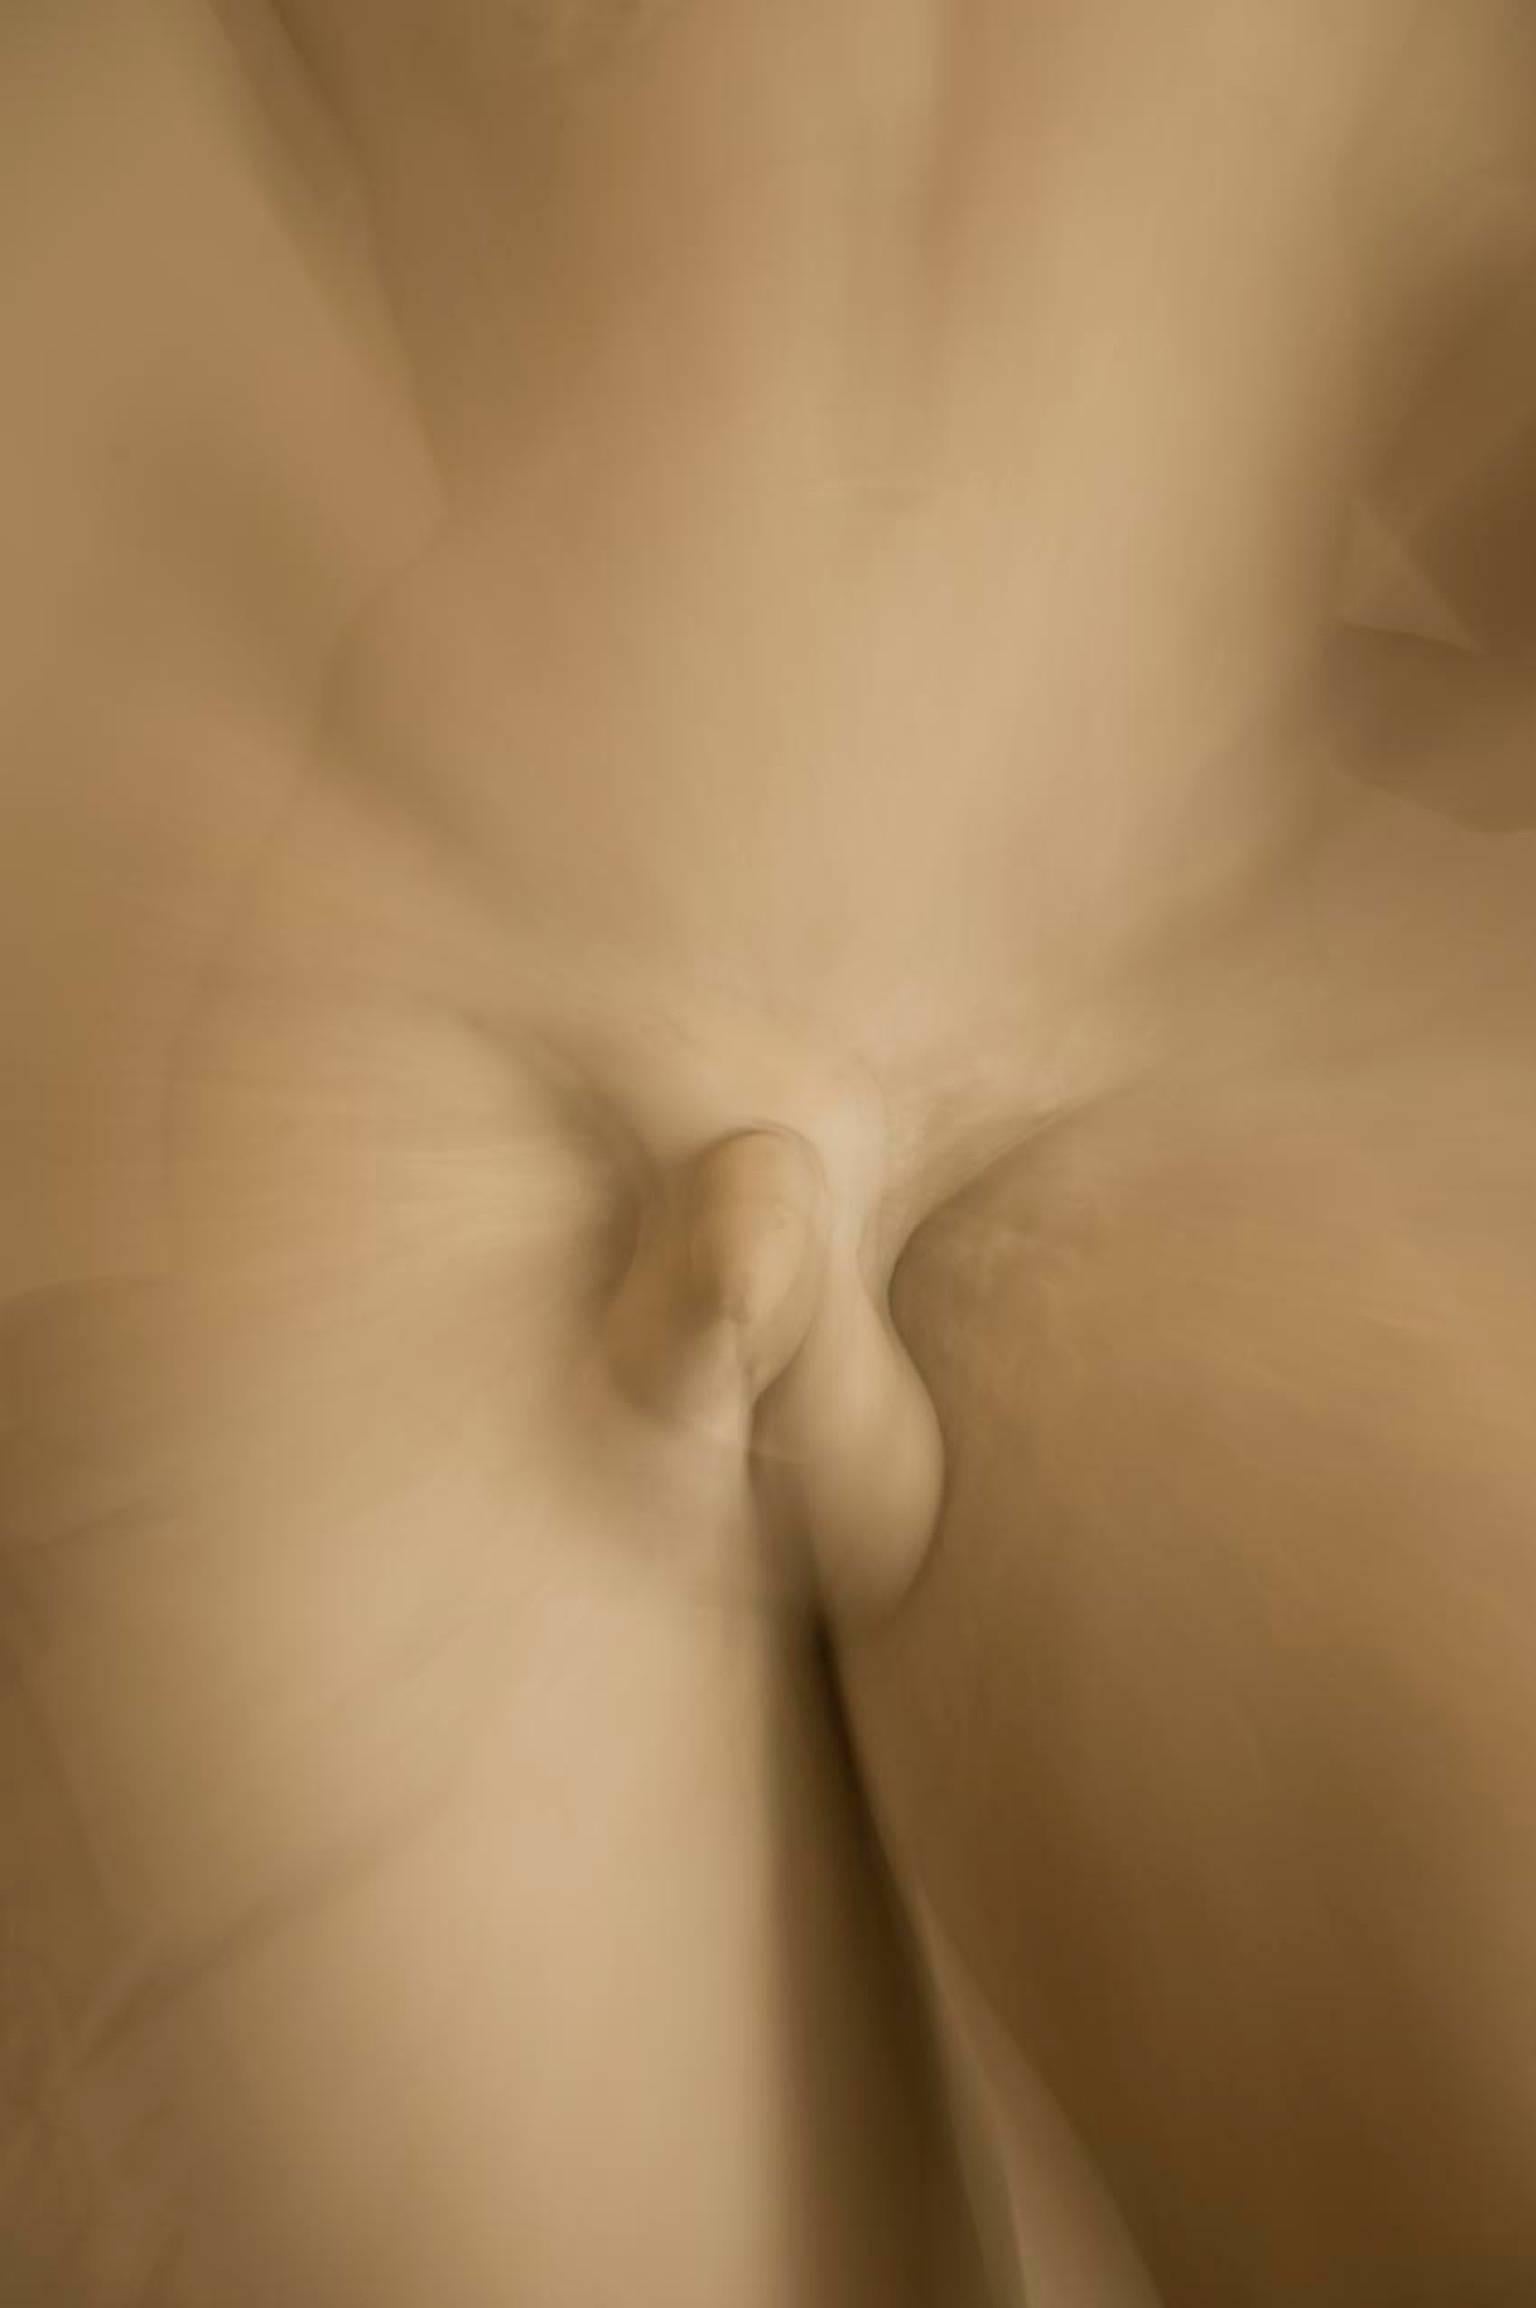 Roman Statue Study 05
Archival Pigment Print
Size: 40" x 27" inches
Edition of 4 + 1AP
2016

Touching the skin of the past is an extraordinary collection of Roman Statues captured with the ICM technique in order to let the marble skin like a true